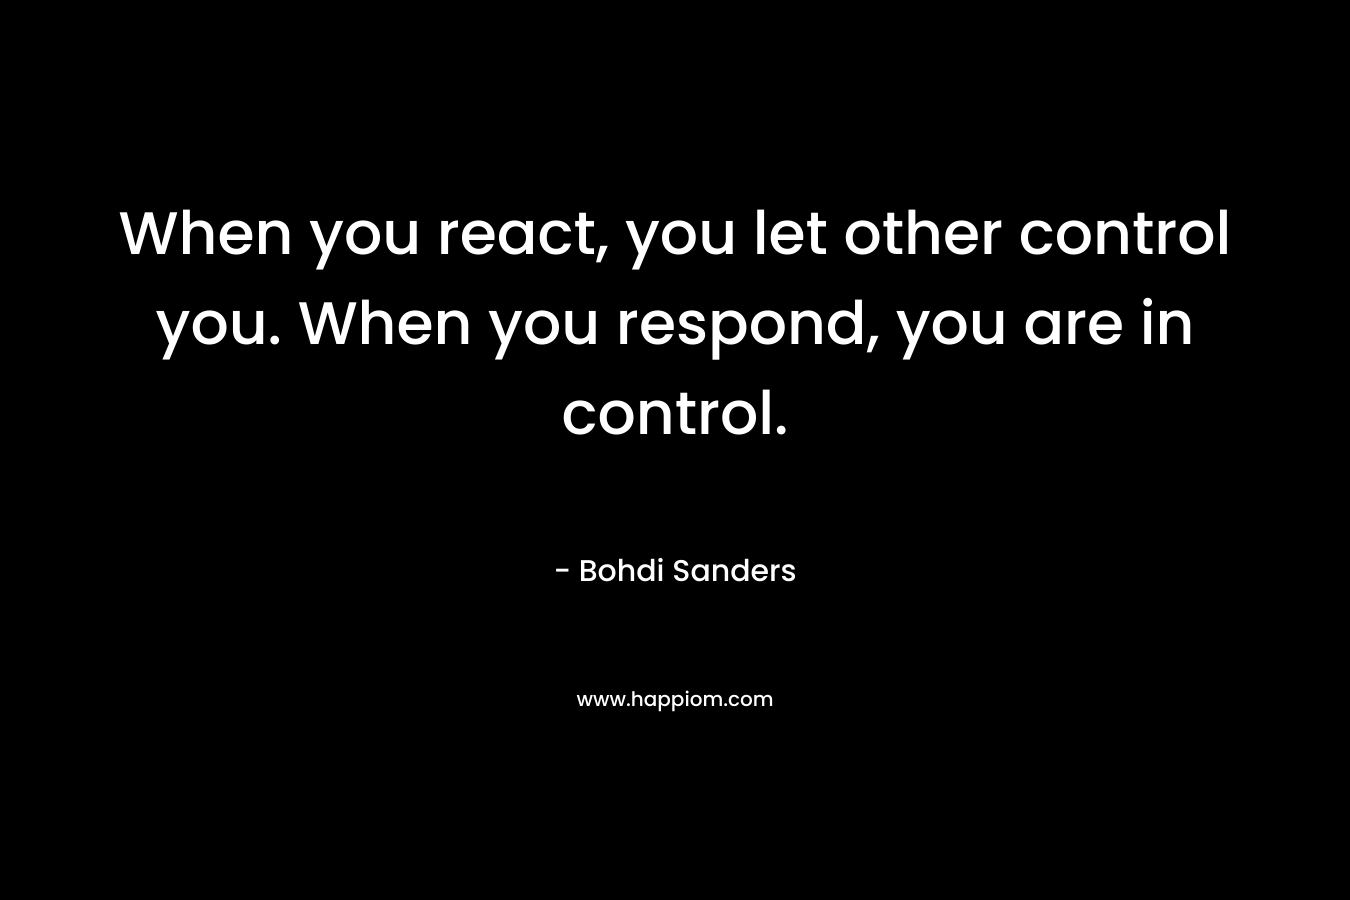 When you react, you let other control you. When you respond, you are in control.